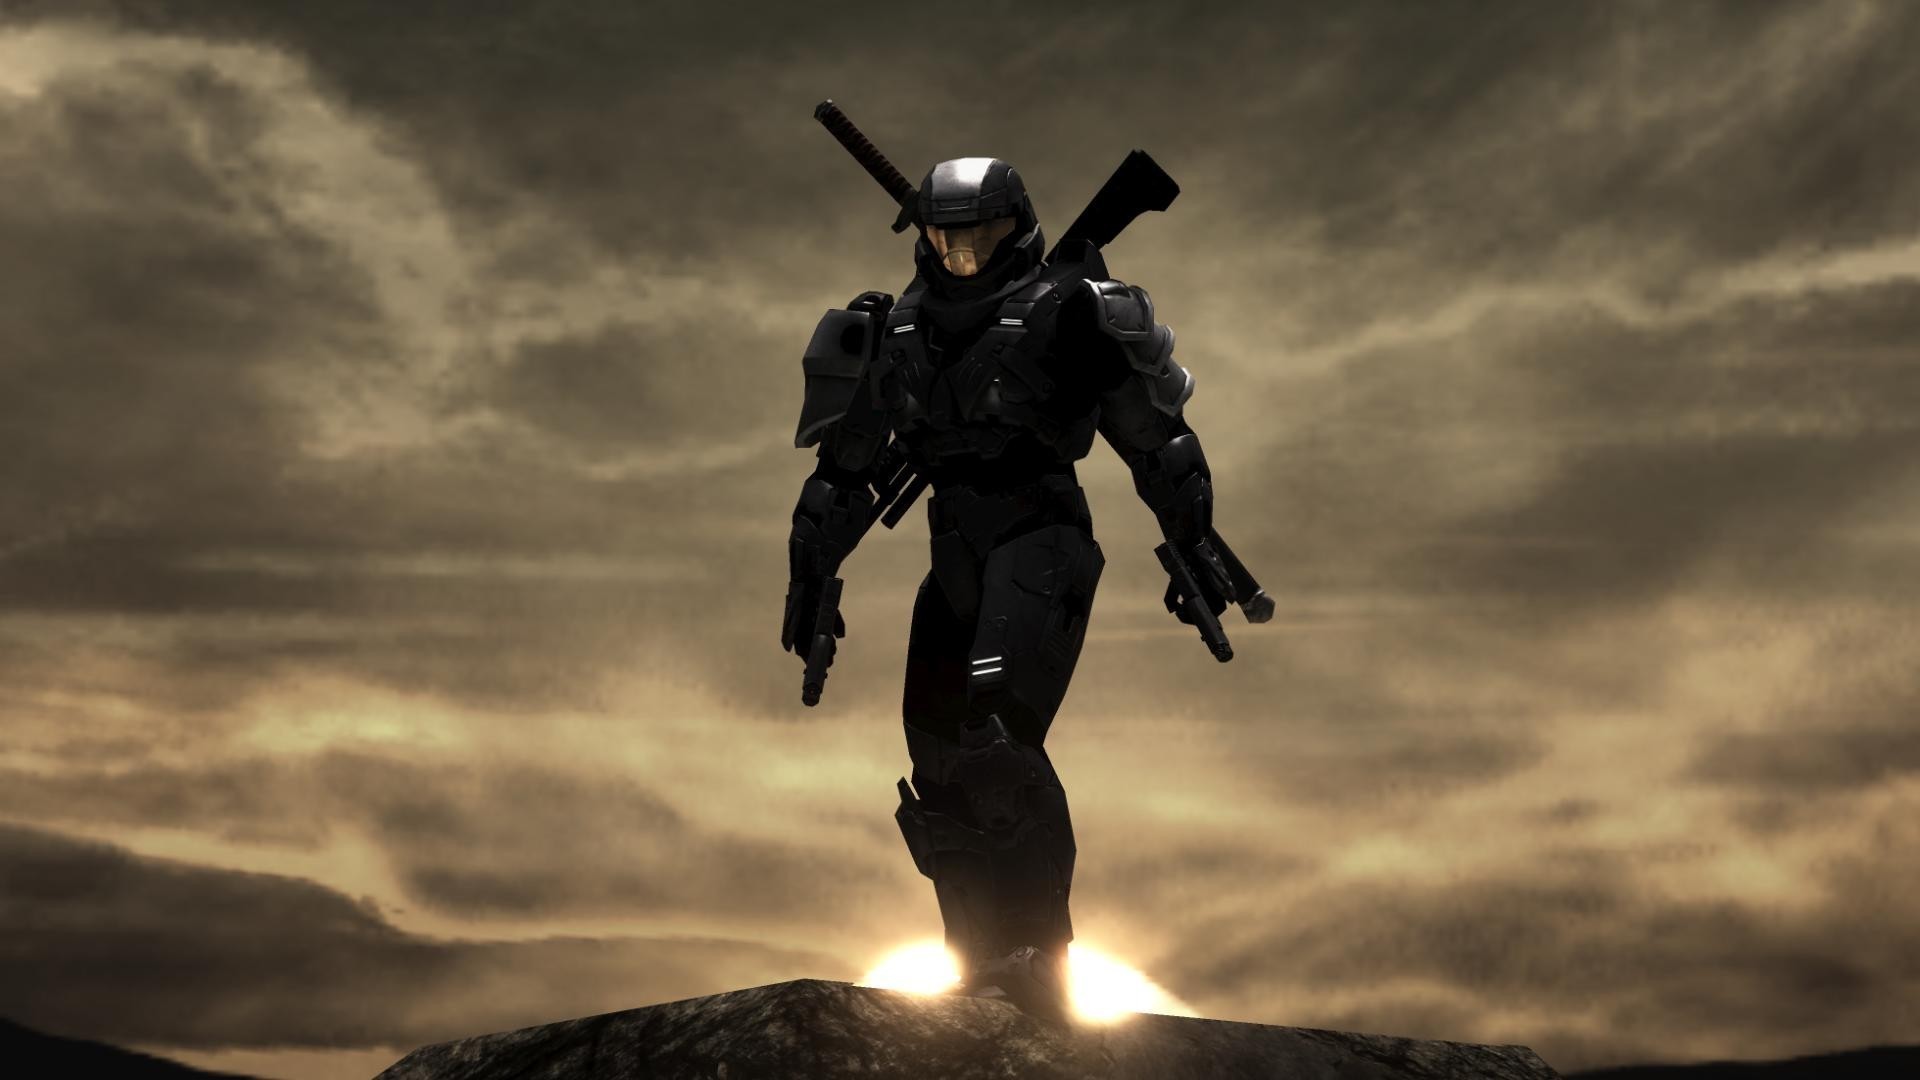 1920x1080  Halo HD | Halo HD Images, Pictures, Wallpapers on QG.87 Wallpapers